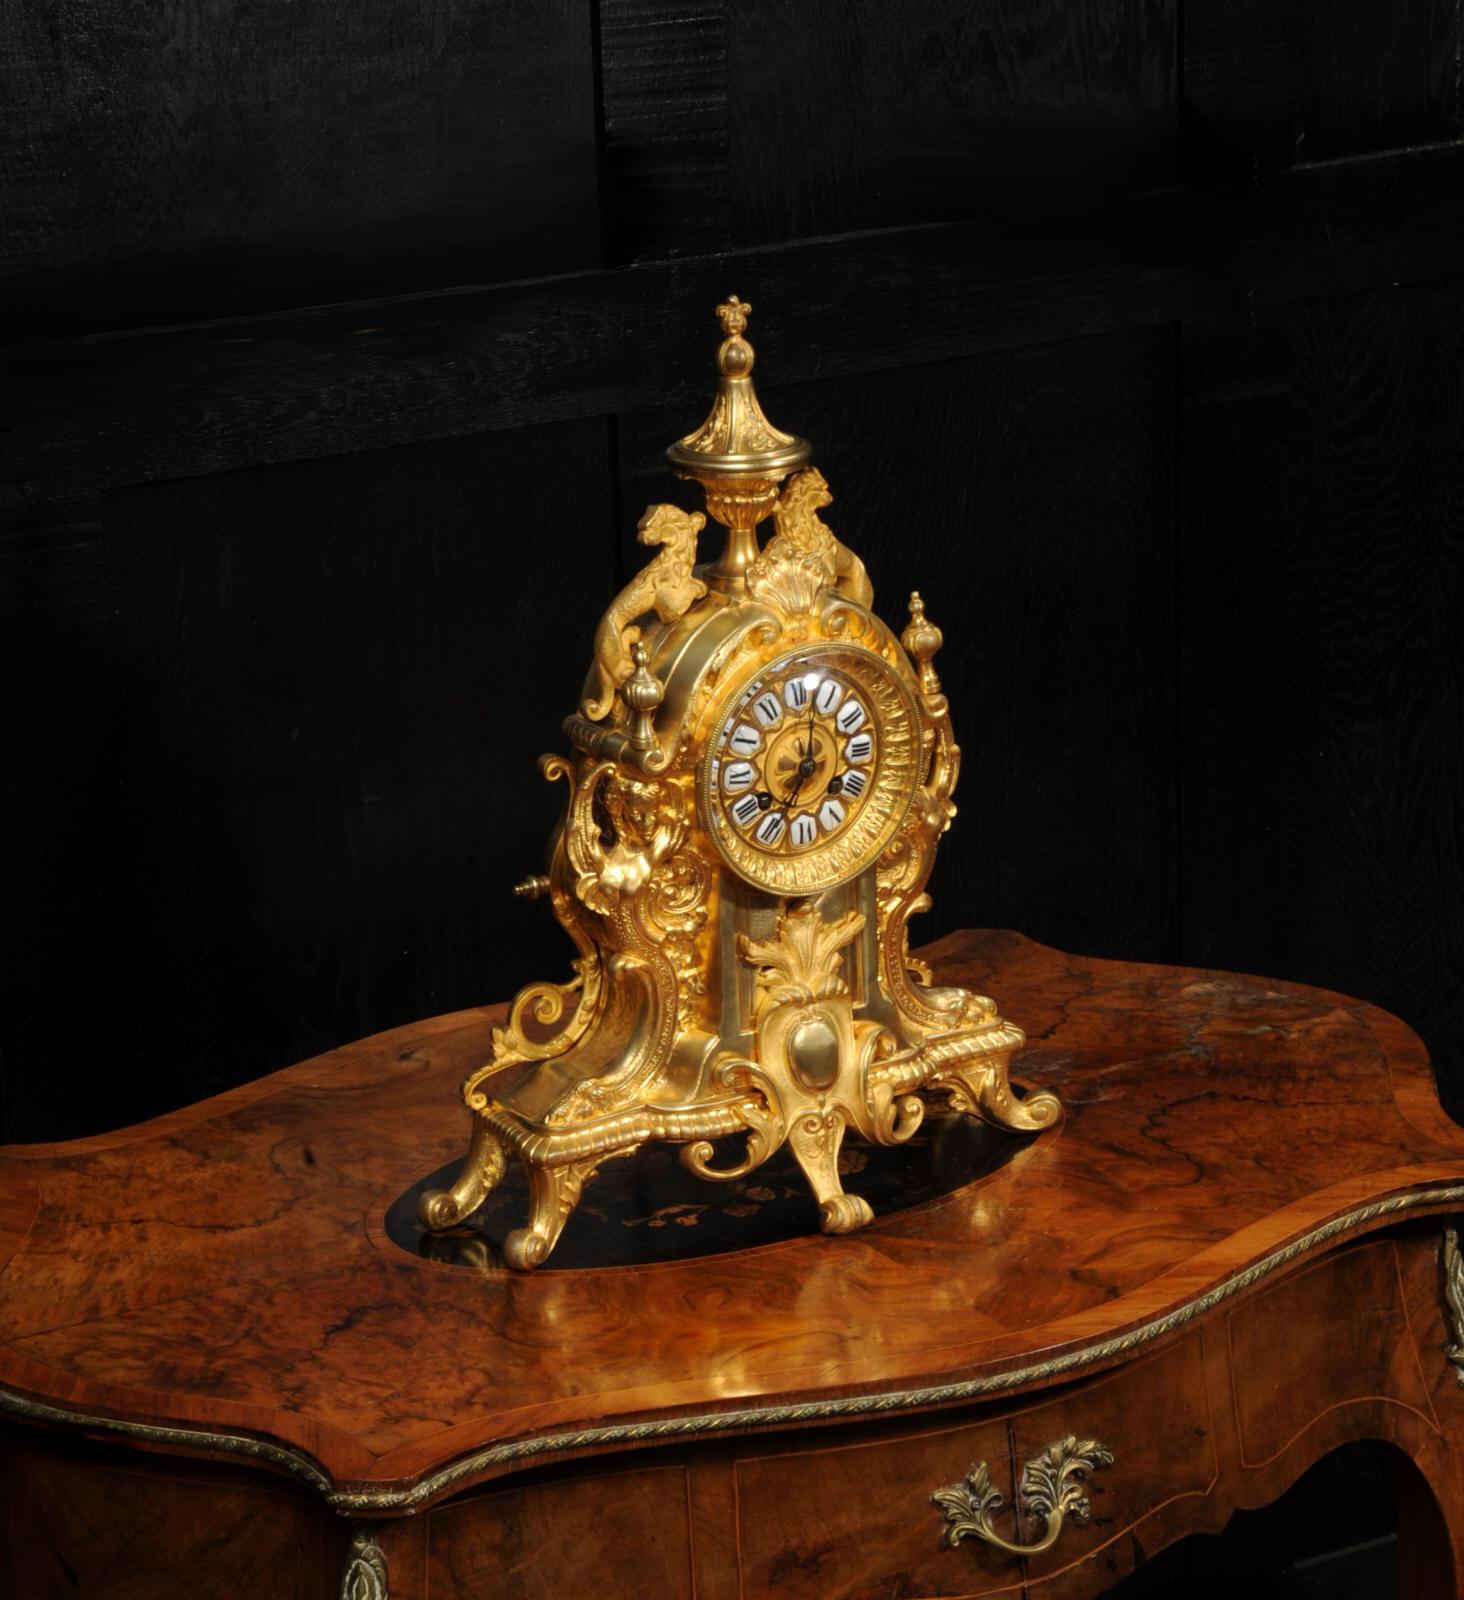 Antique French Ormolu Clock - Lions Rampant - overhauled and tested In Good Condition For Sale In Belper, Derbyshire